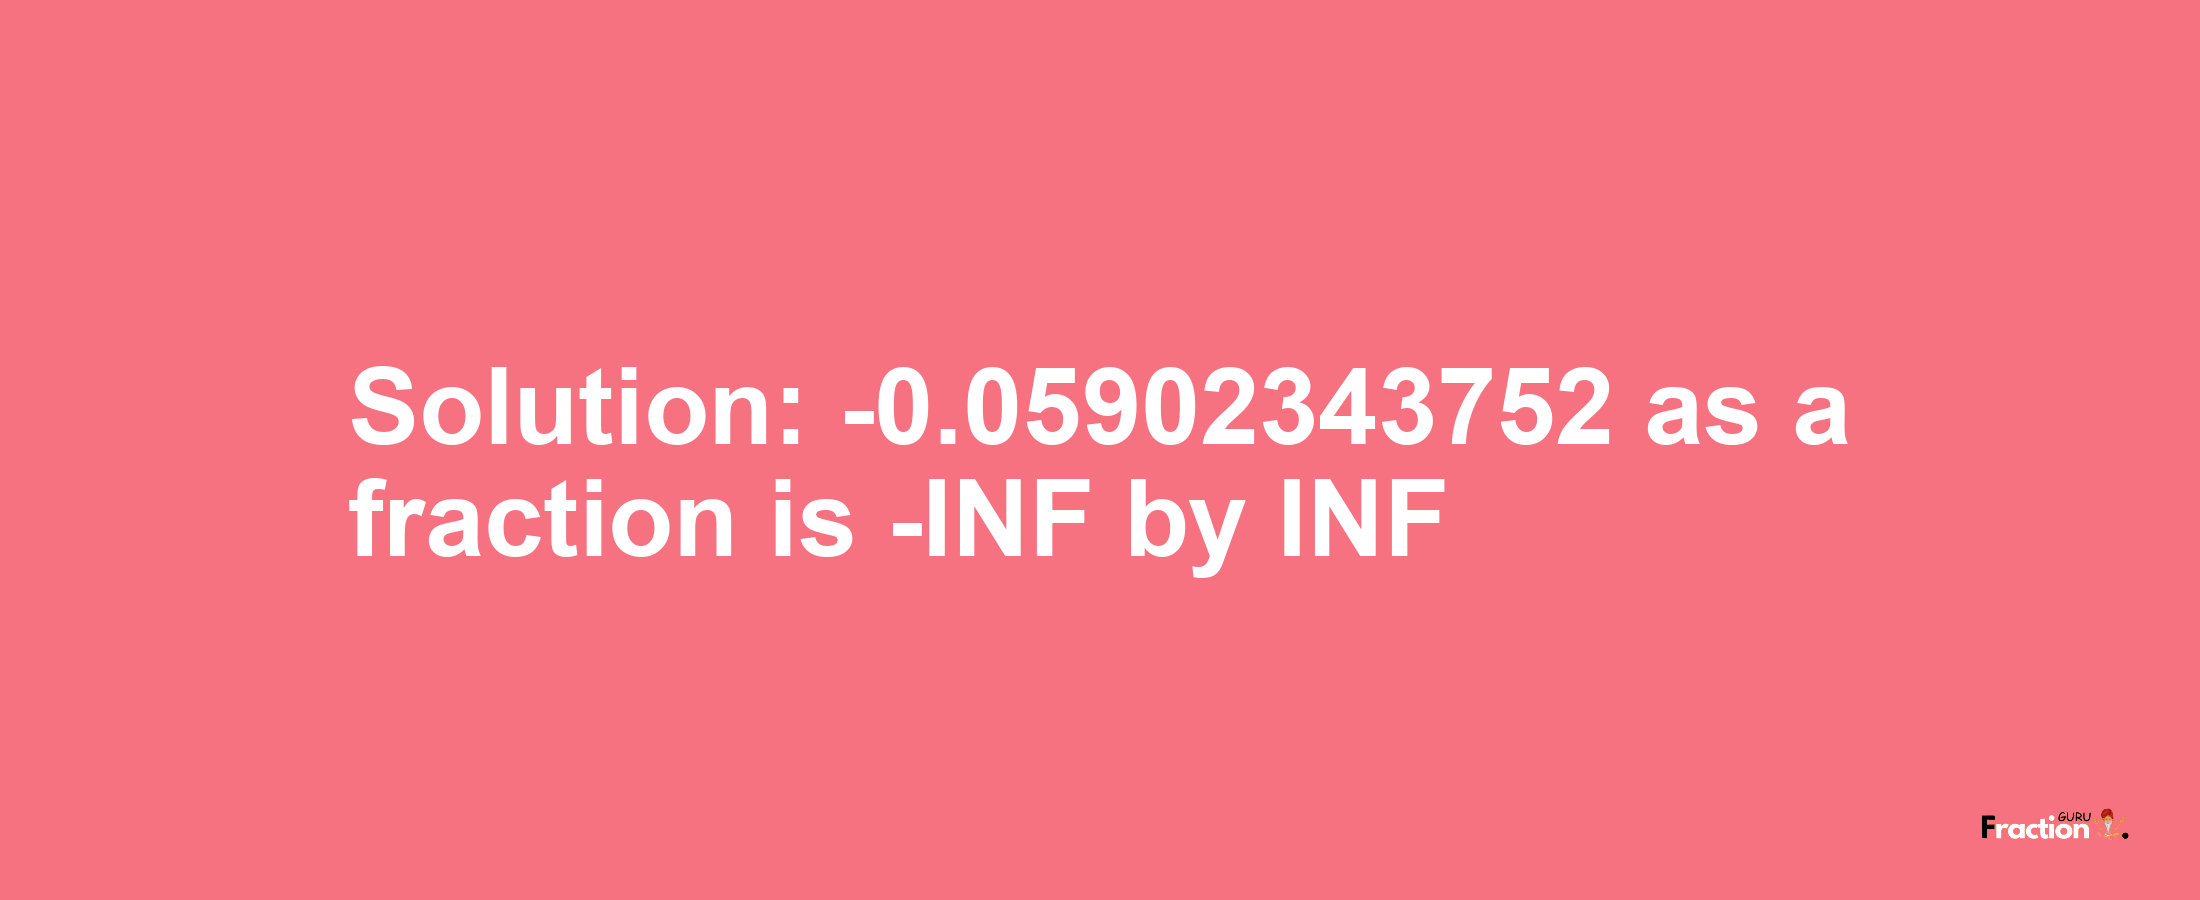 Solution:-0.05902343752 as a fraction is -INF/INF